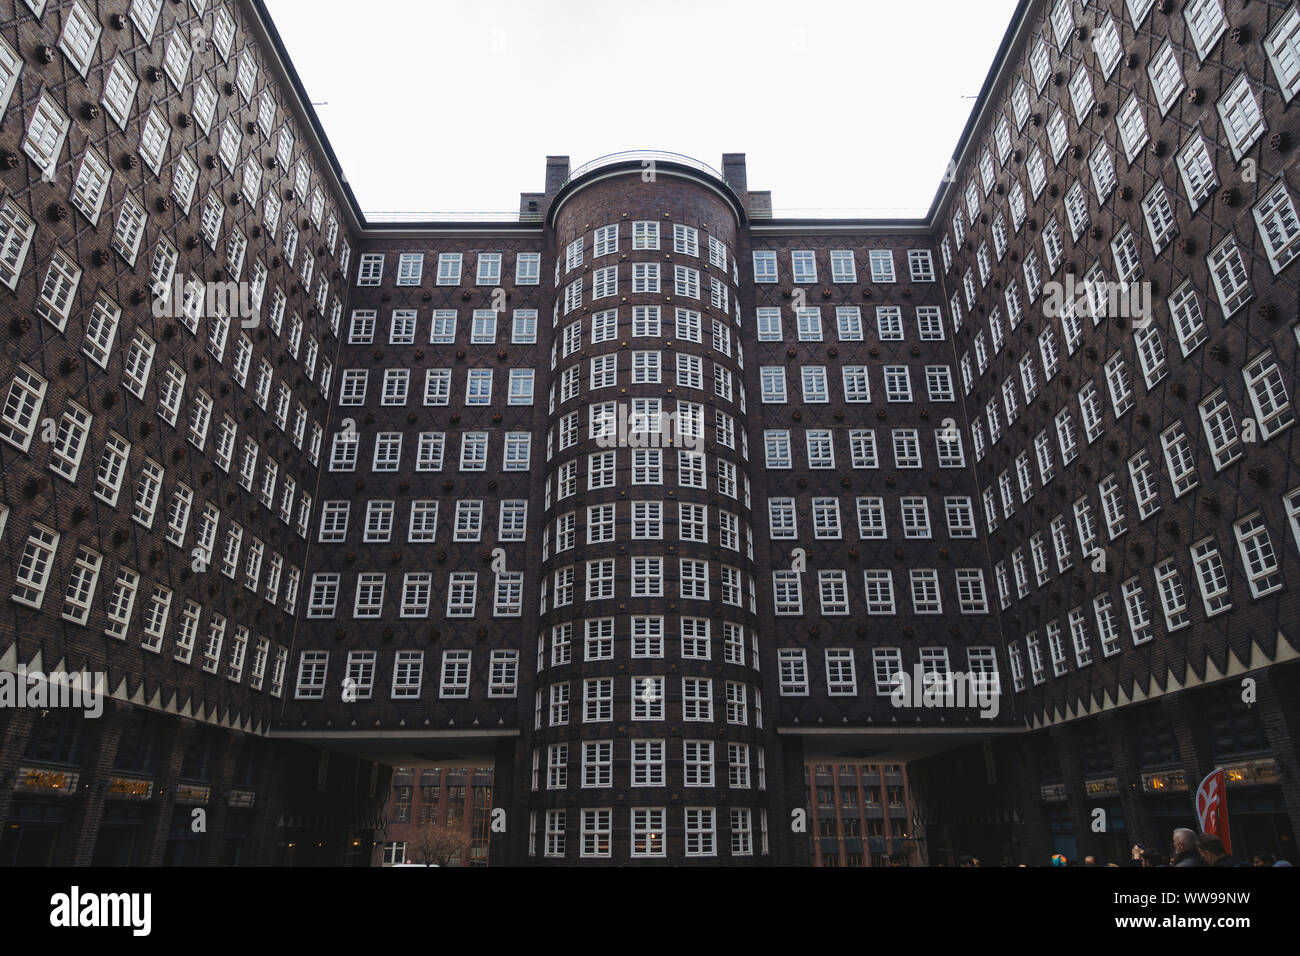 The vast rows of windows in the courtyard of the Sprinkenhof building in Hamburg, Germany. Designed by Fritz Höger and completed in 1943 Stock Photo